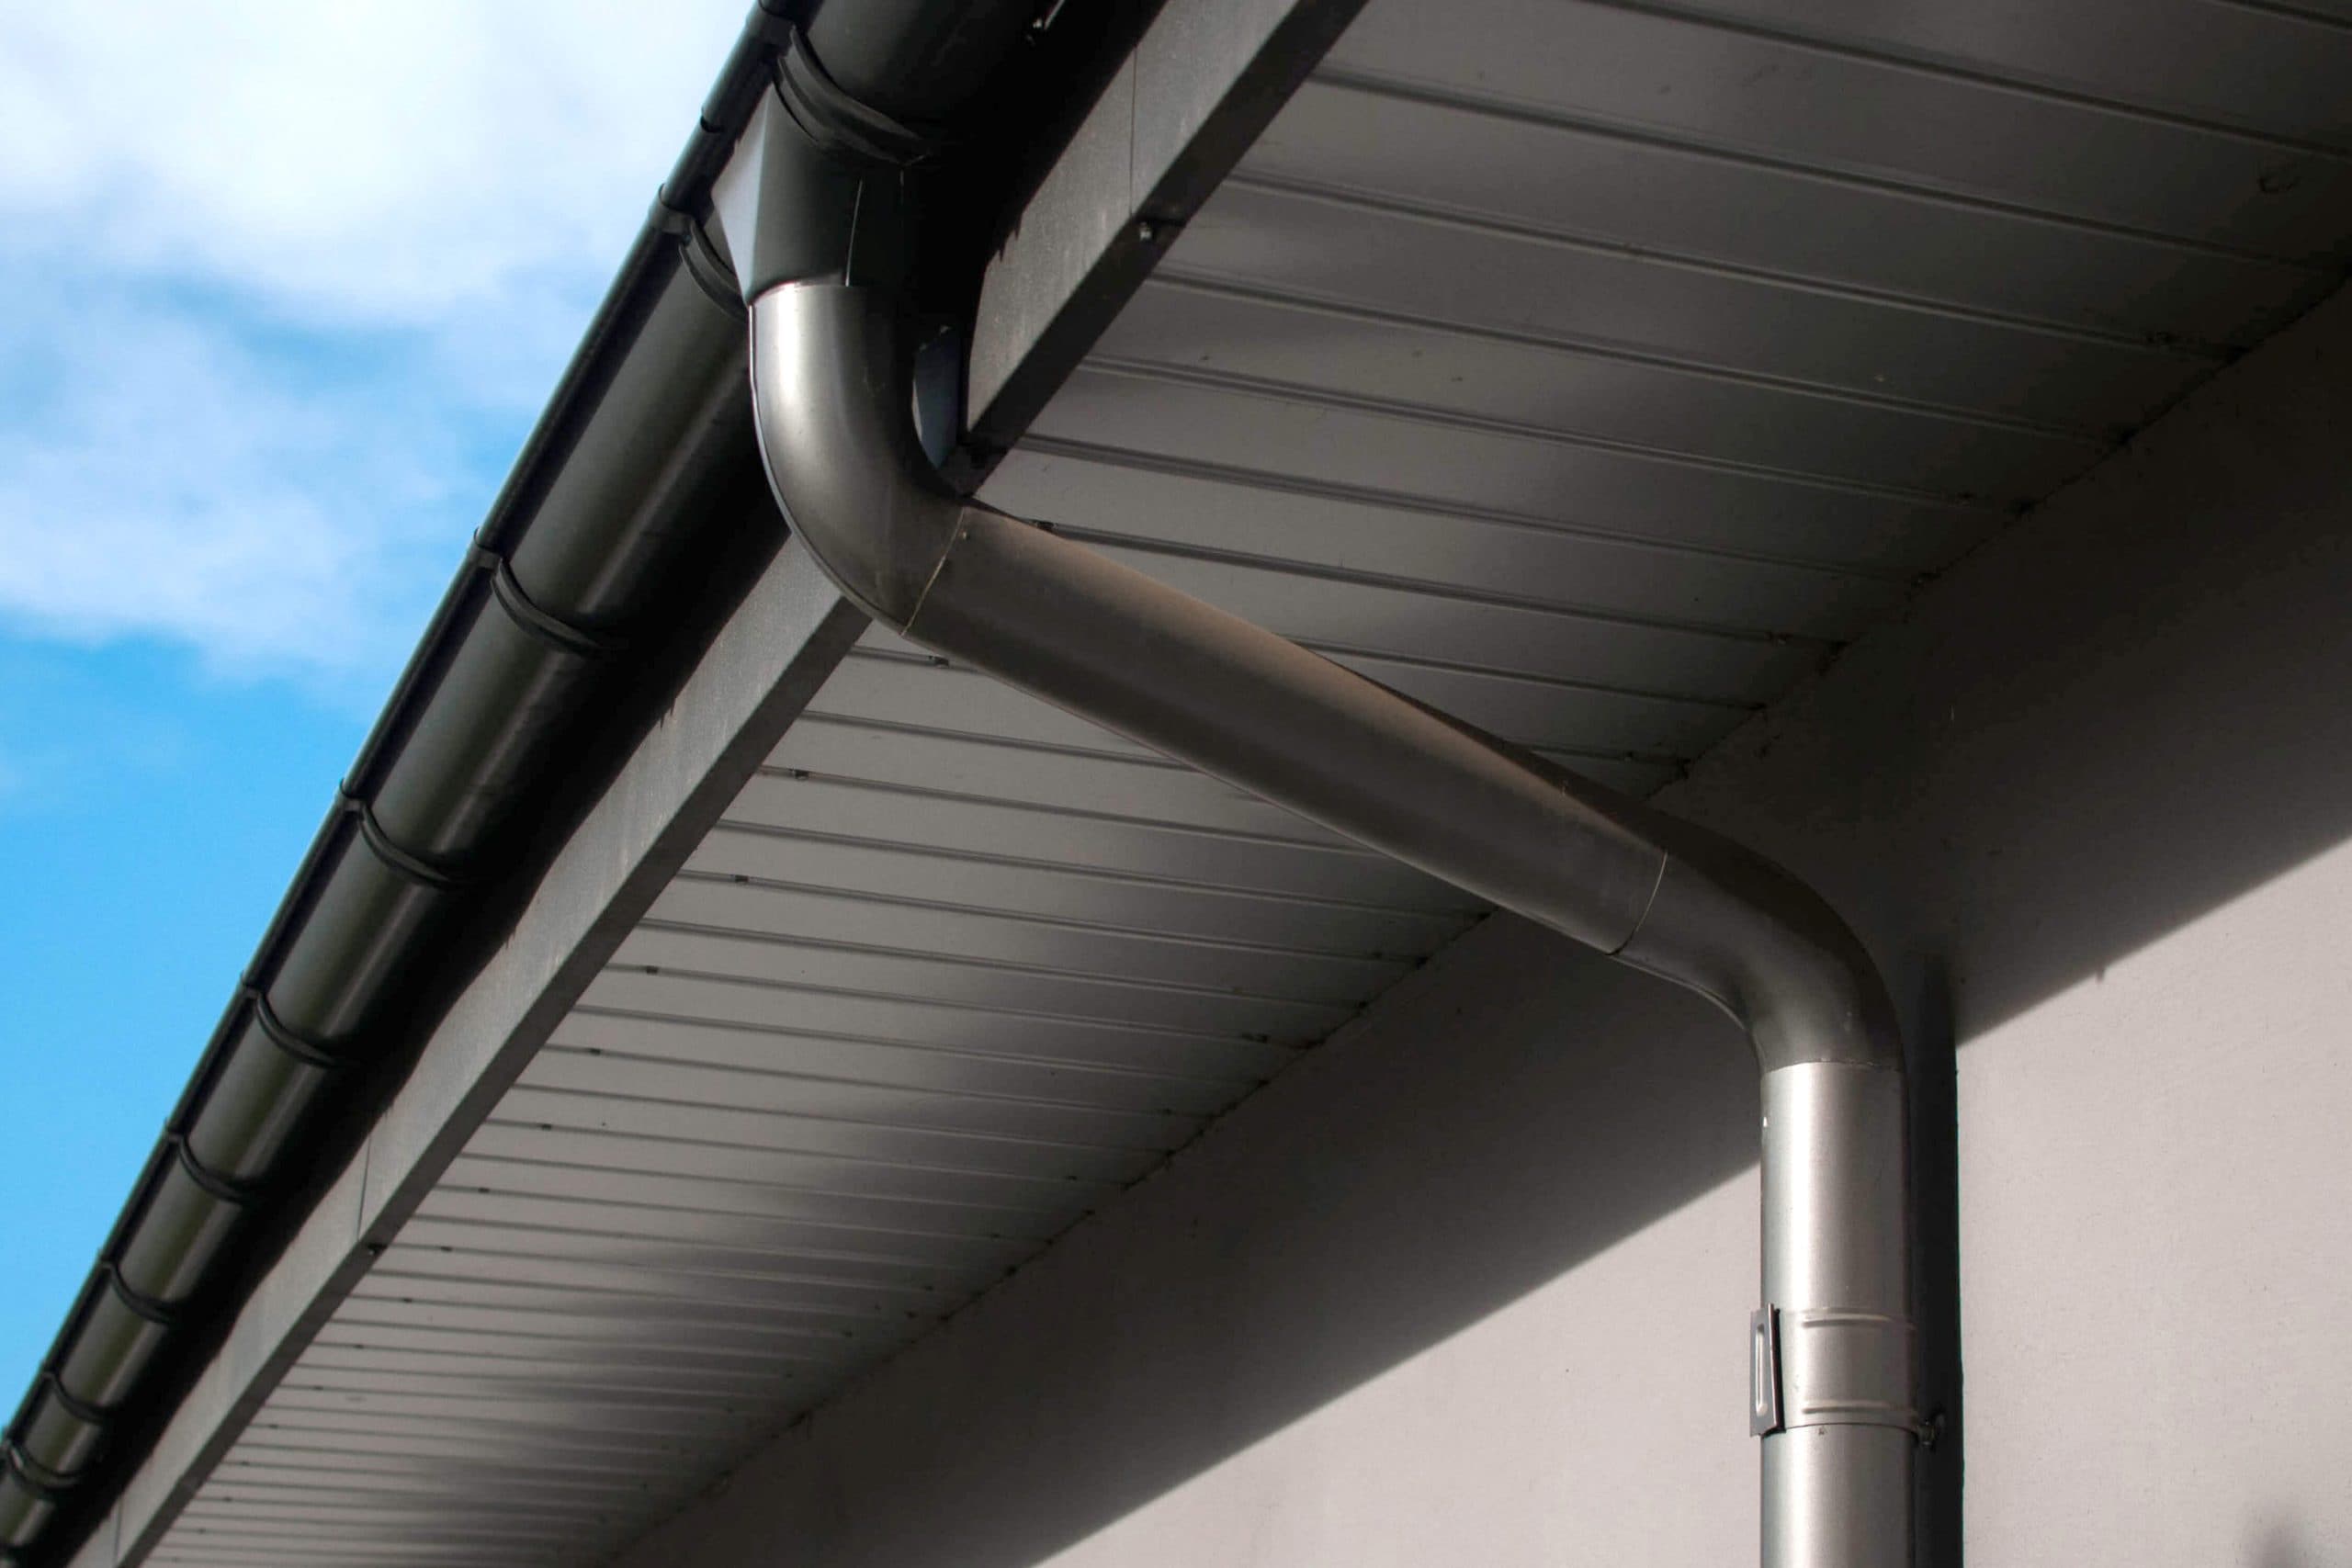 Reliable and affordable Galvanized gutters installation in Spokane